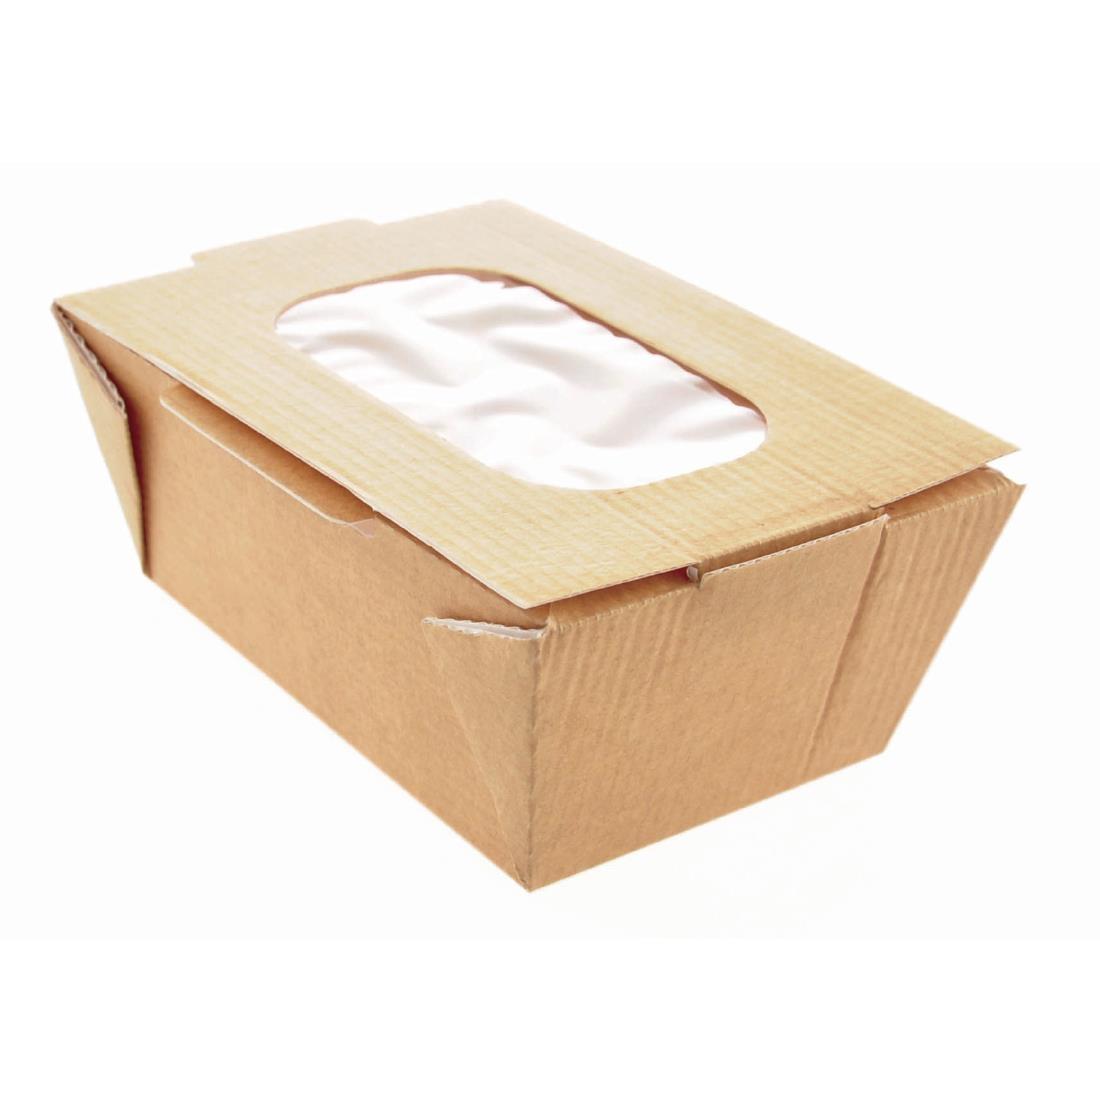 Huhtamaki Recyclable Paperboard Takeaway Boxes With Window Small 700ml / 24oz (Pack of 360) - CL315  - 1